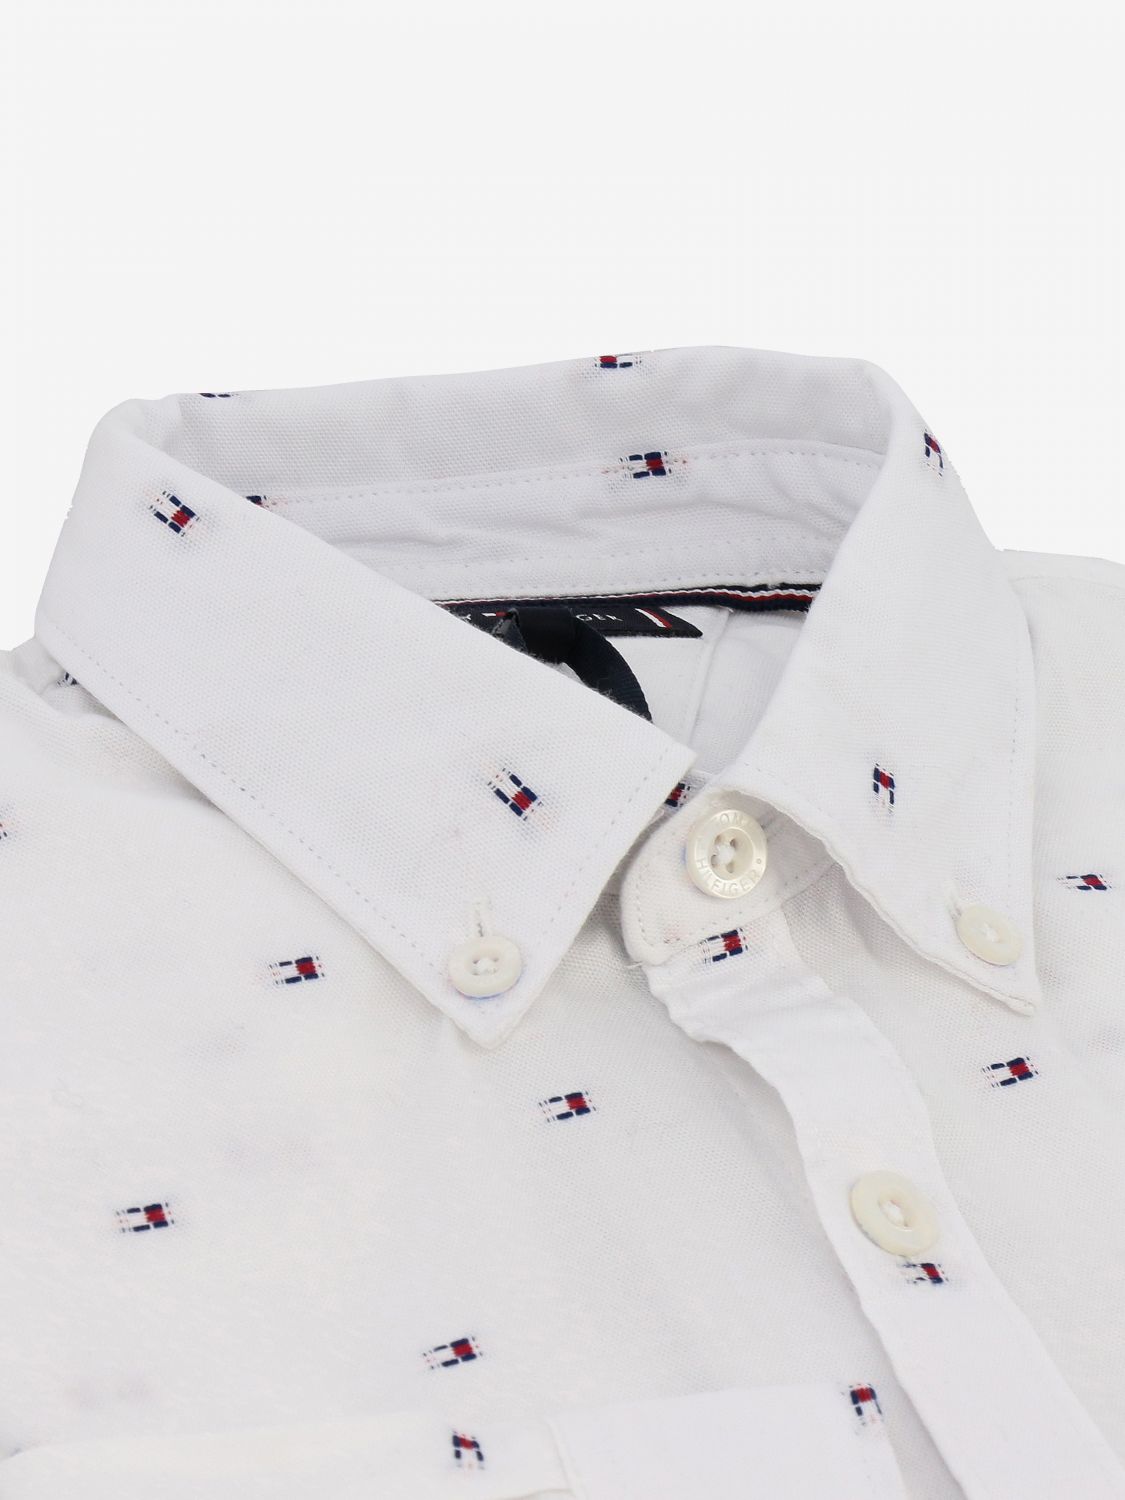 all white tommy hilfiger shirt